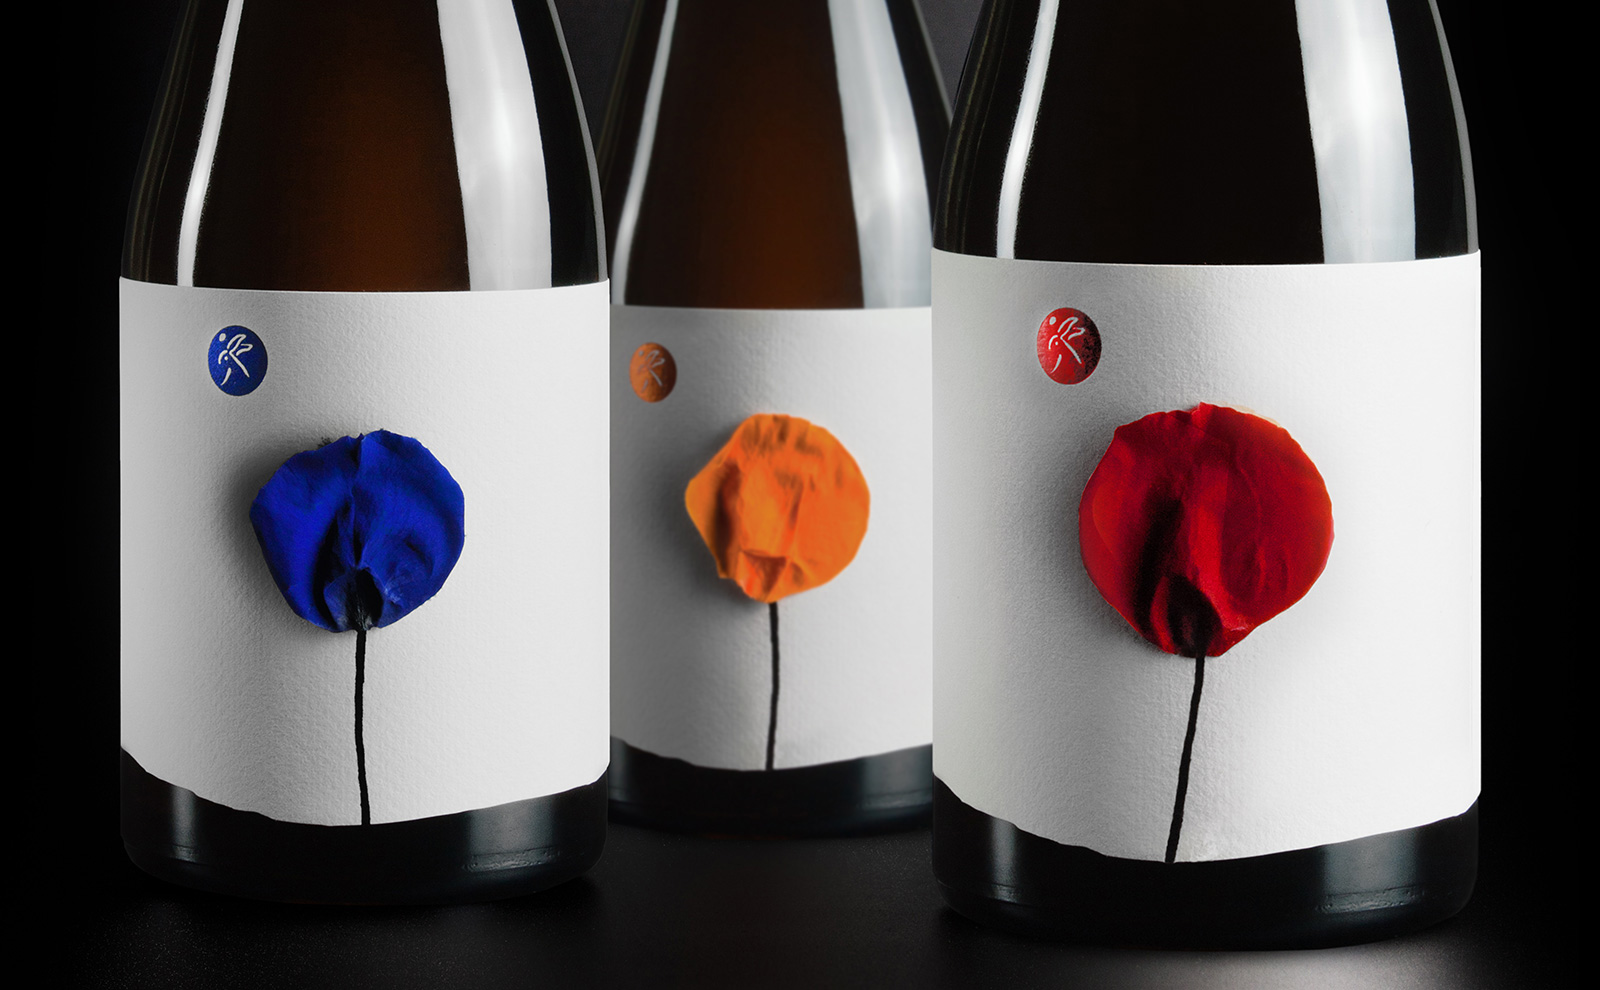 Numeroquattro Combines Heritage and Design with Rose Petal Wine Labels